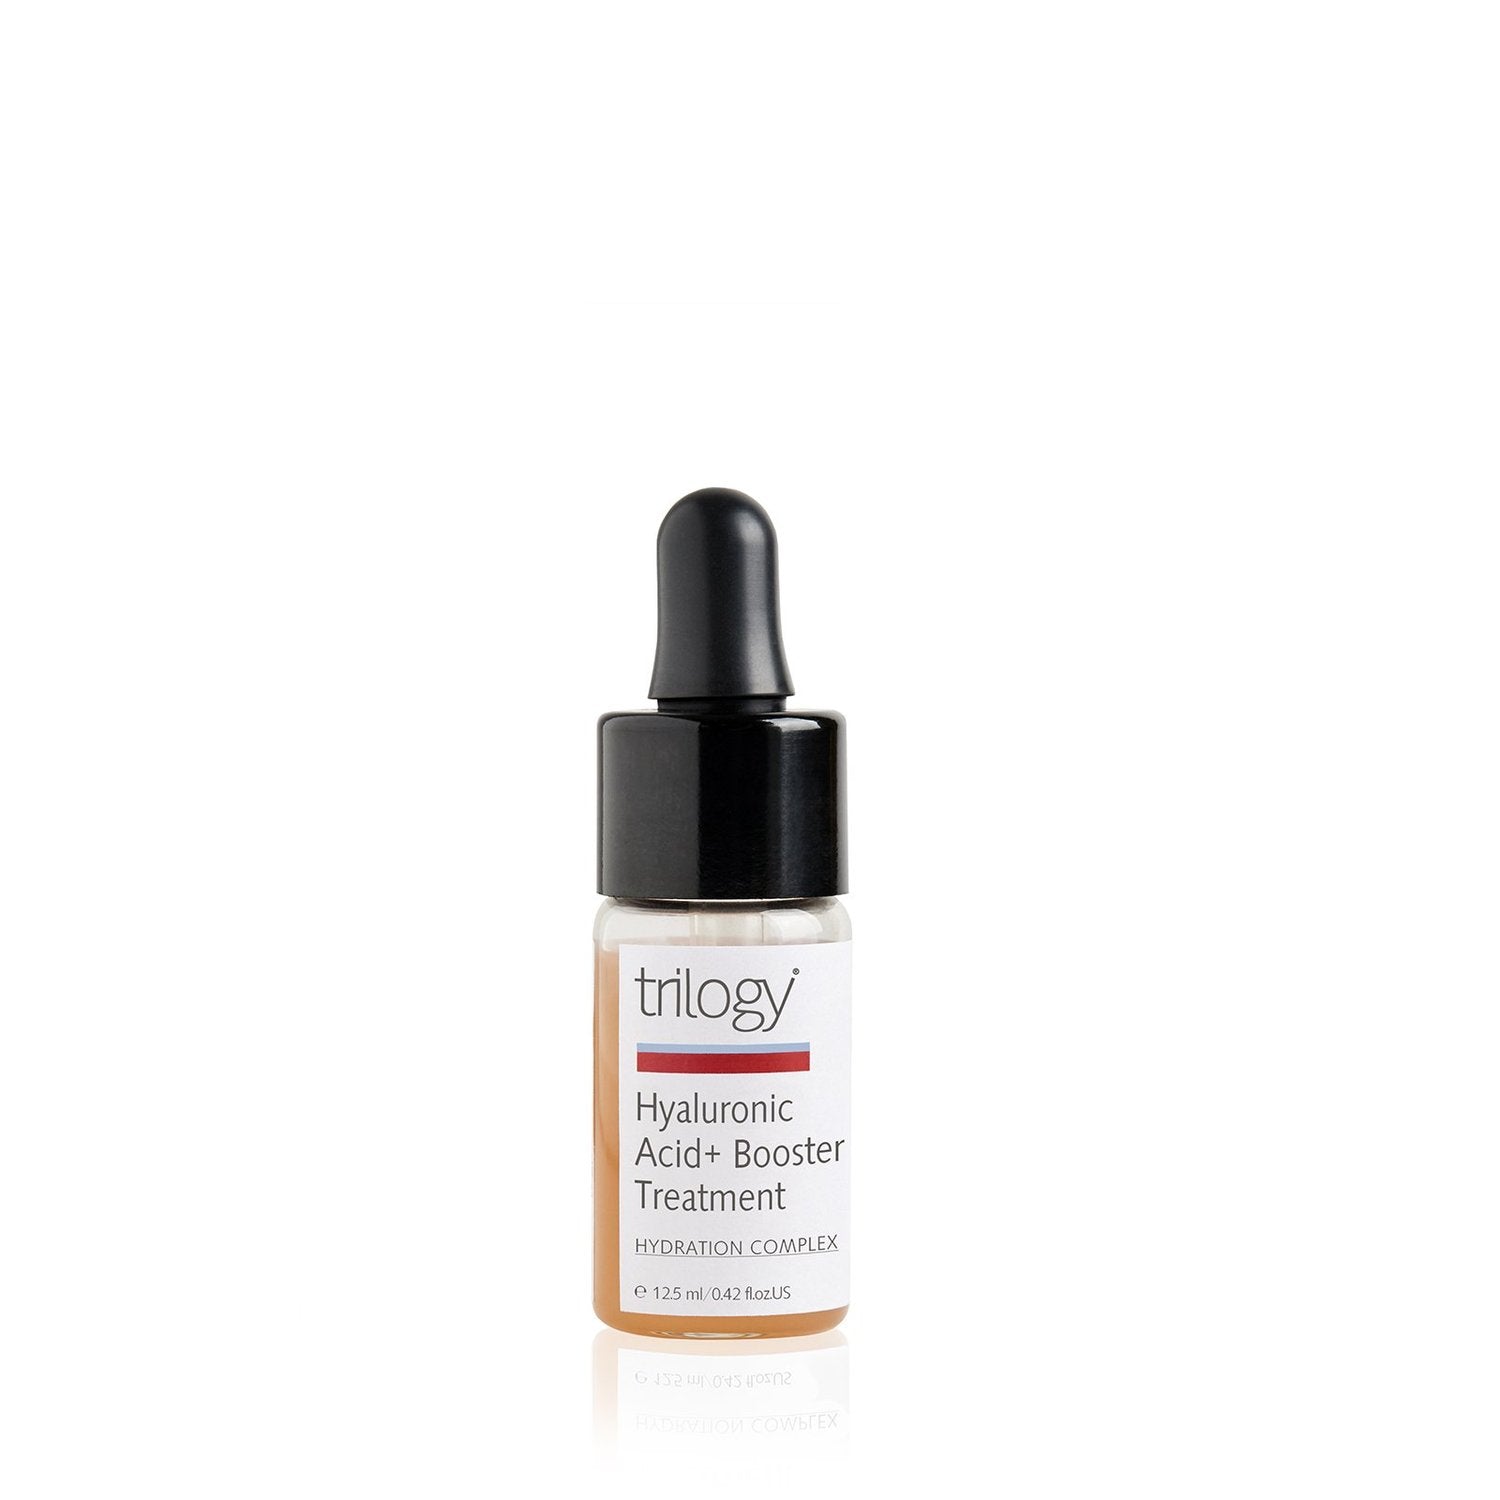 Trilogy Hyaluronic Acid Booster Serum Treatment